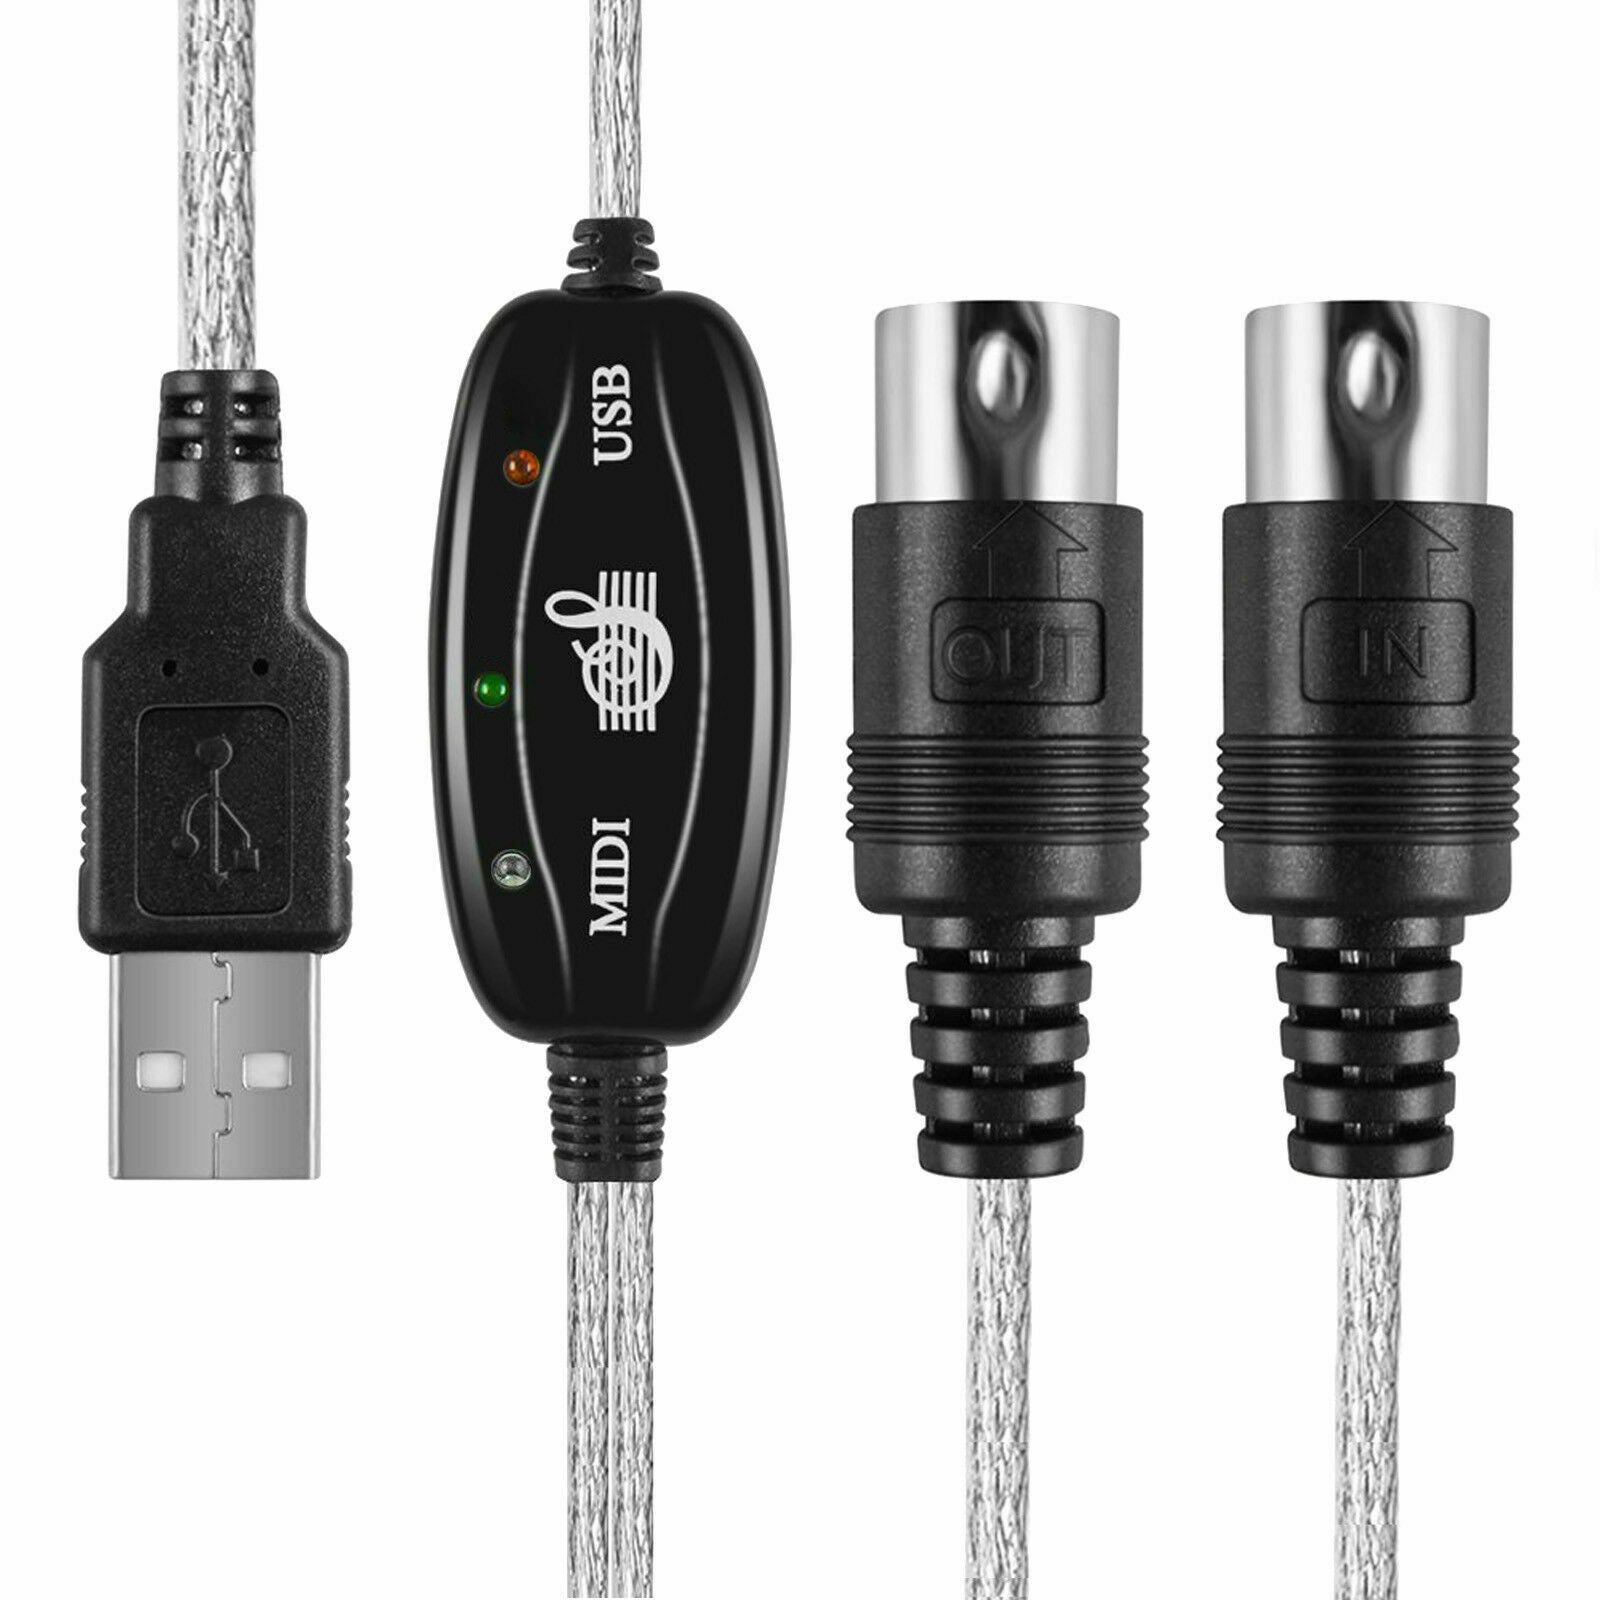 USB IN-OUT MIDI interface cable converter